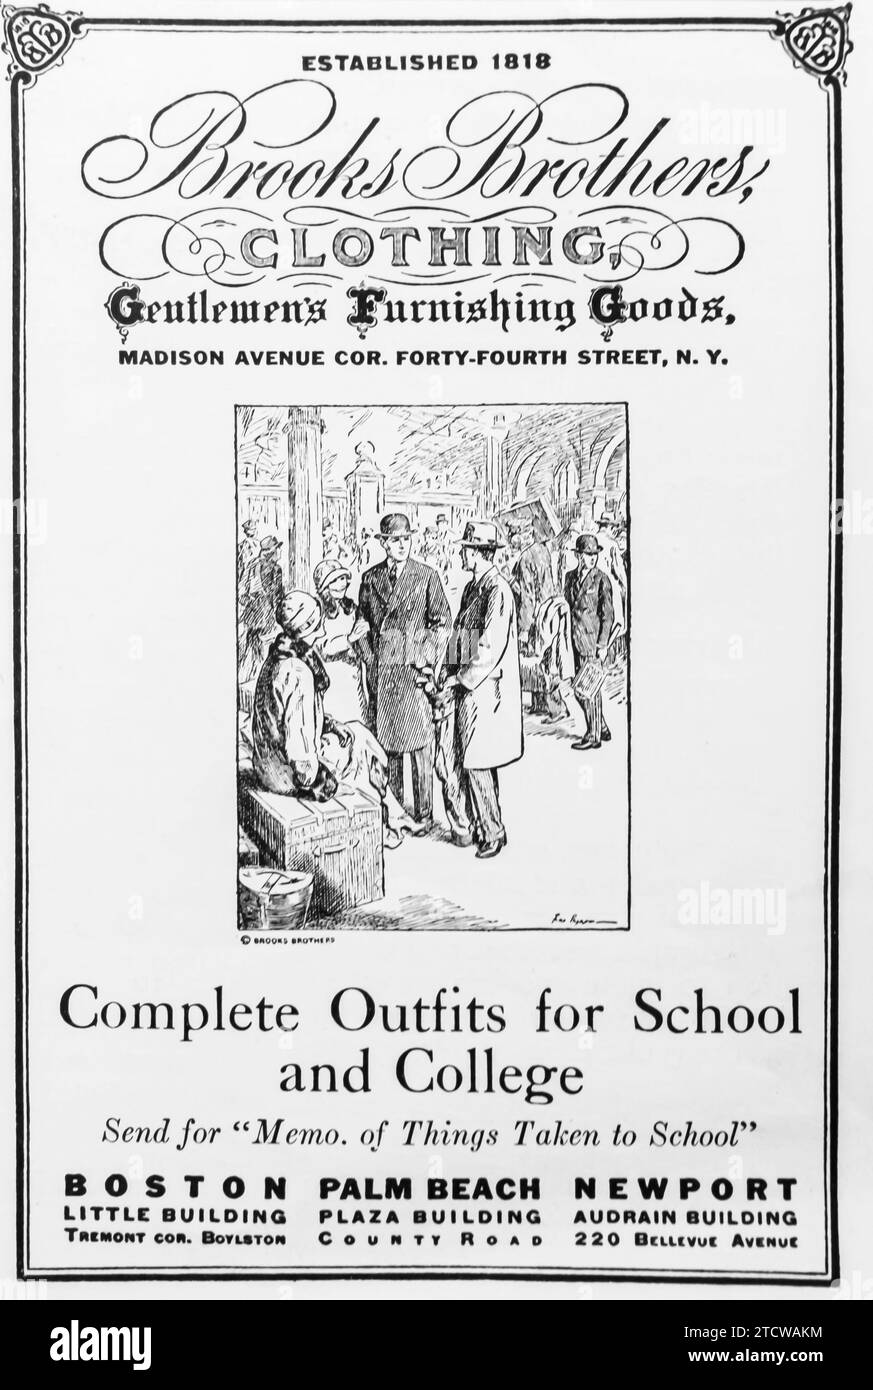 1926 Brooks Brothers clothing ad, New York shop Stock Photo